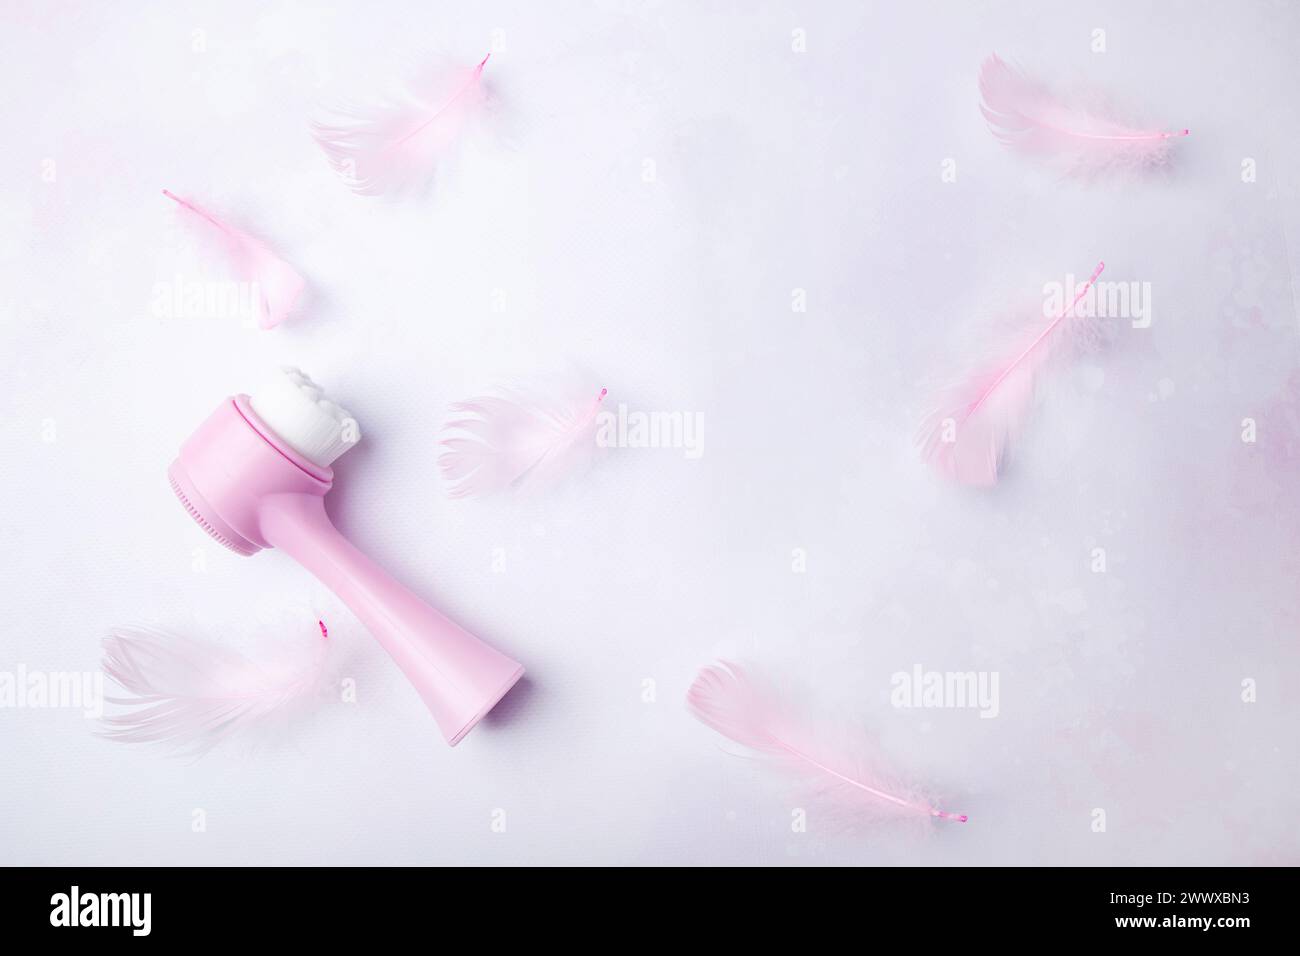 Soft pink face brush tool among feathers. Beauty blogs and reviews concept. Stock Photo